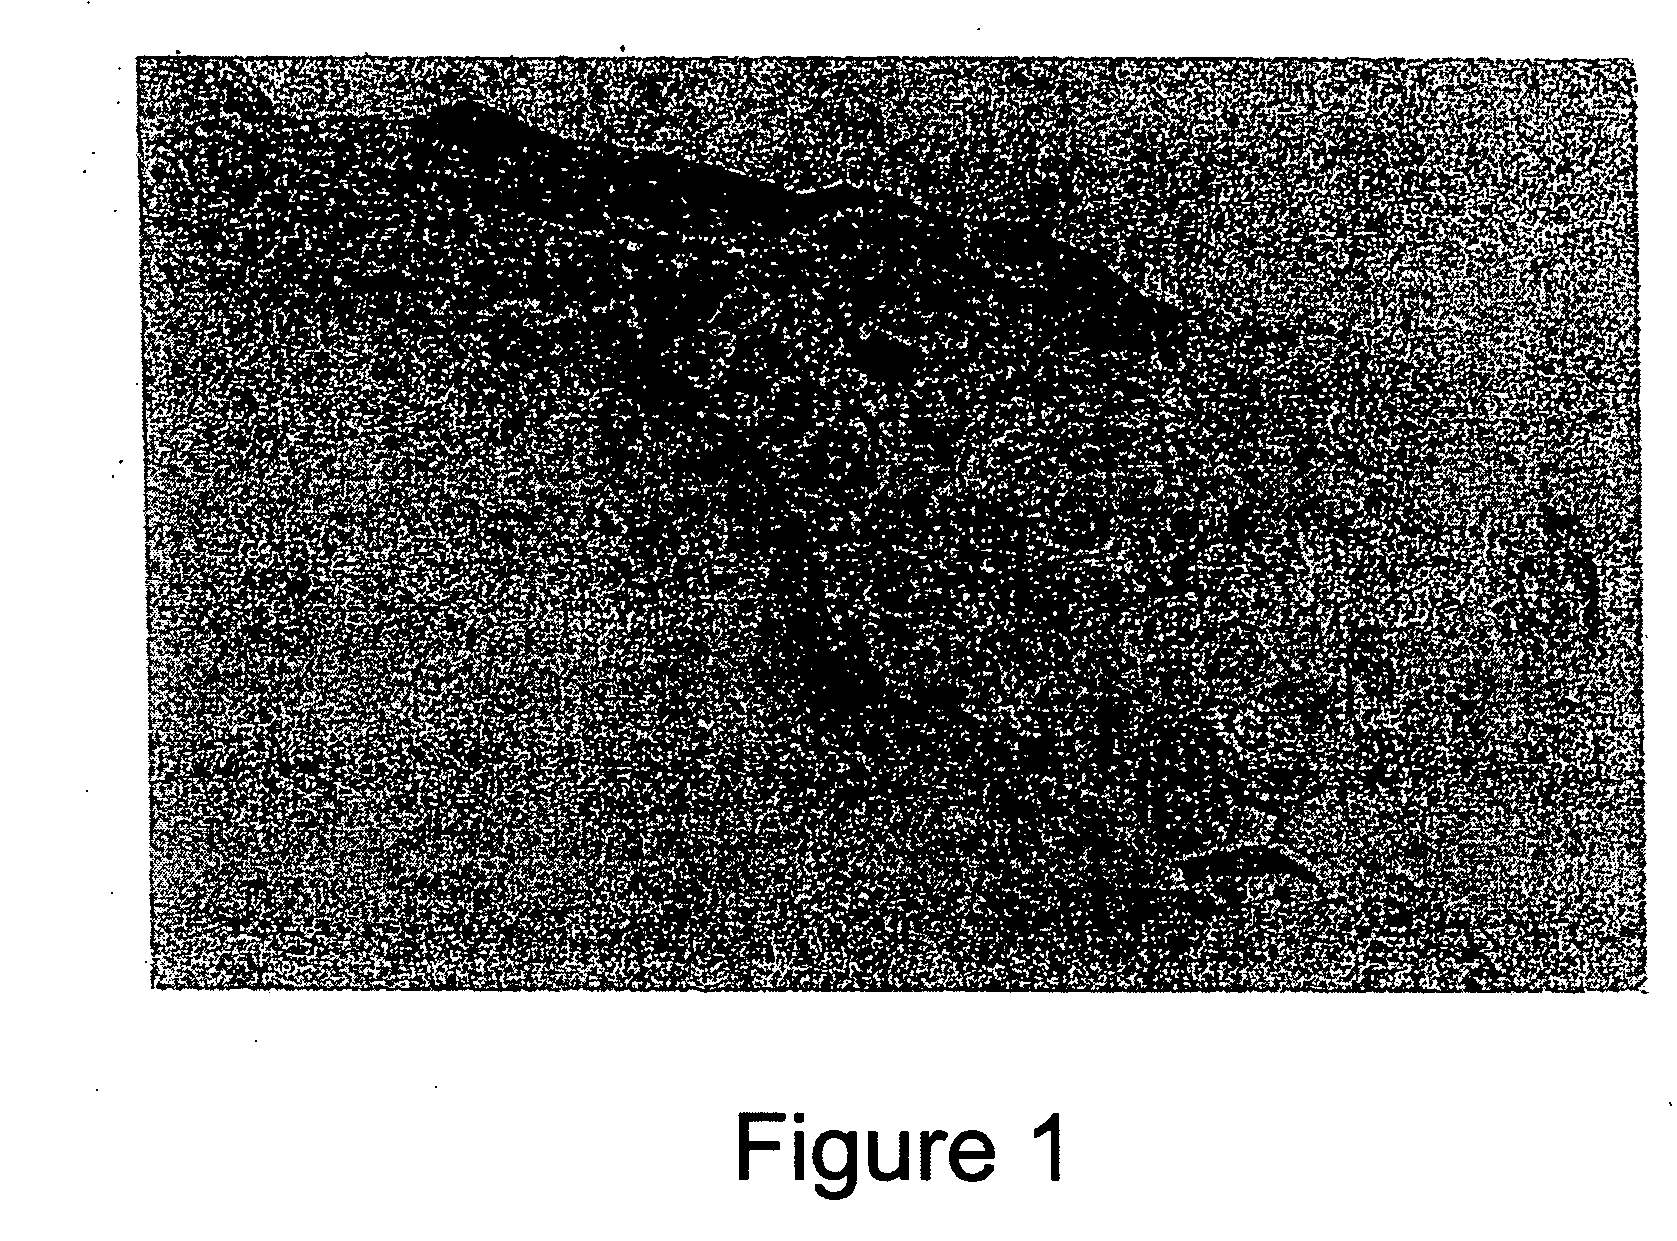 Tissue system with undifferentiated stem cells derived from corneal limbus